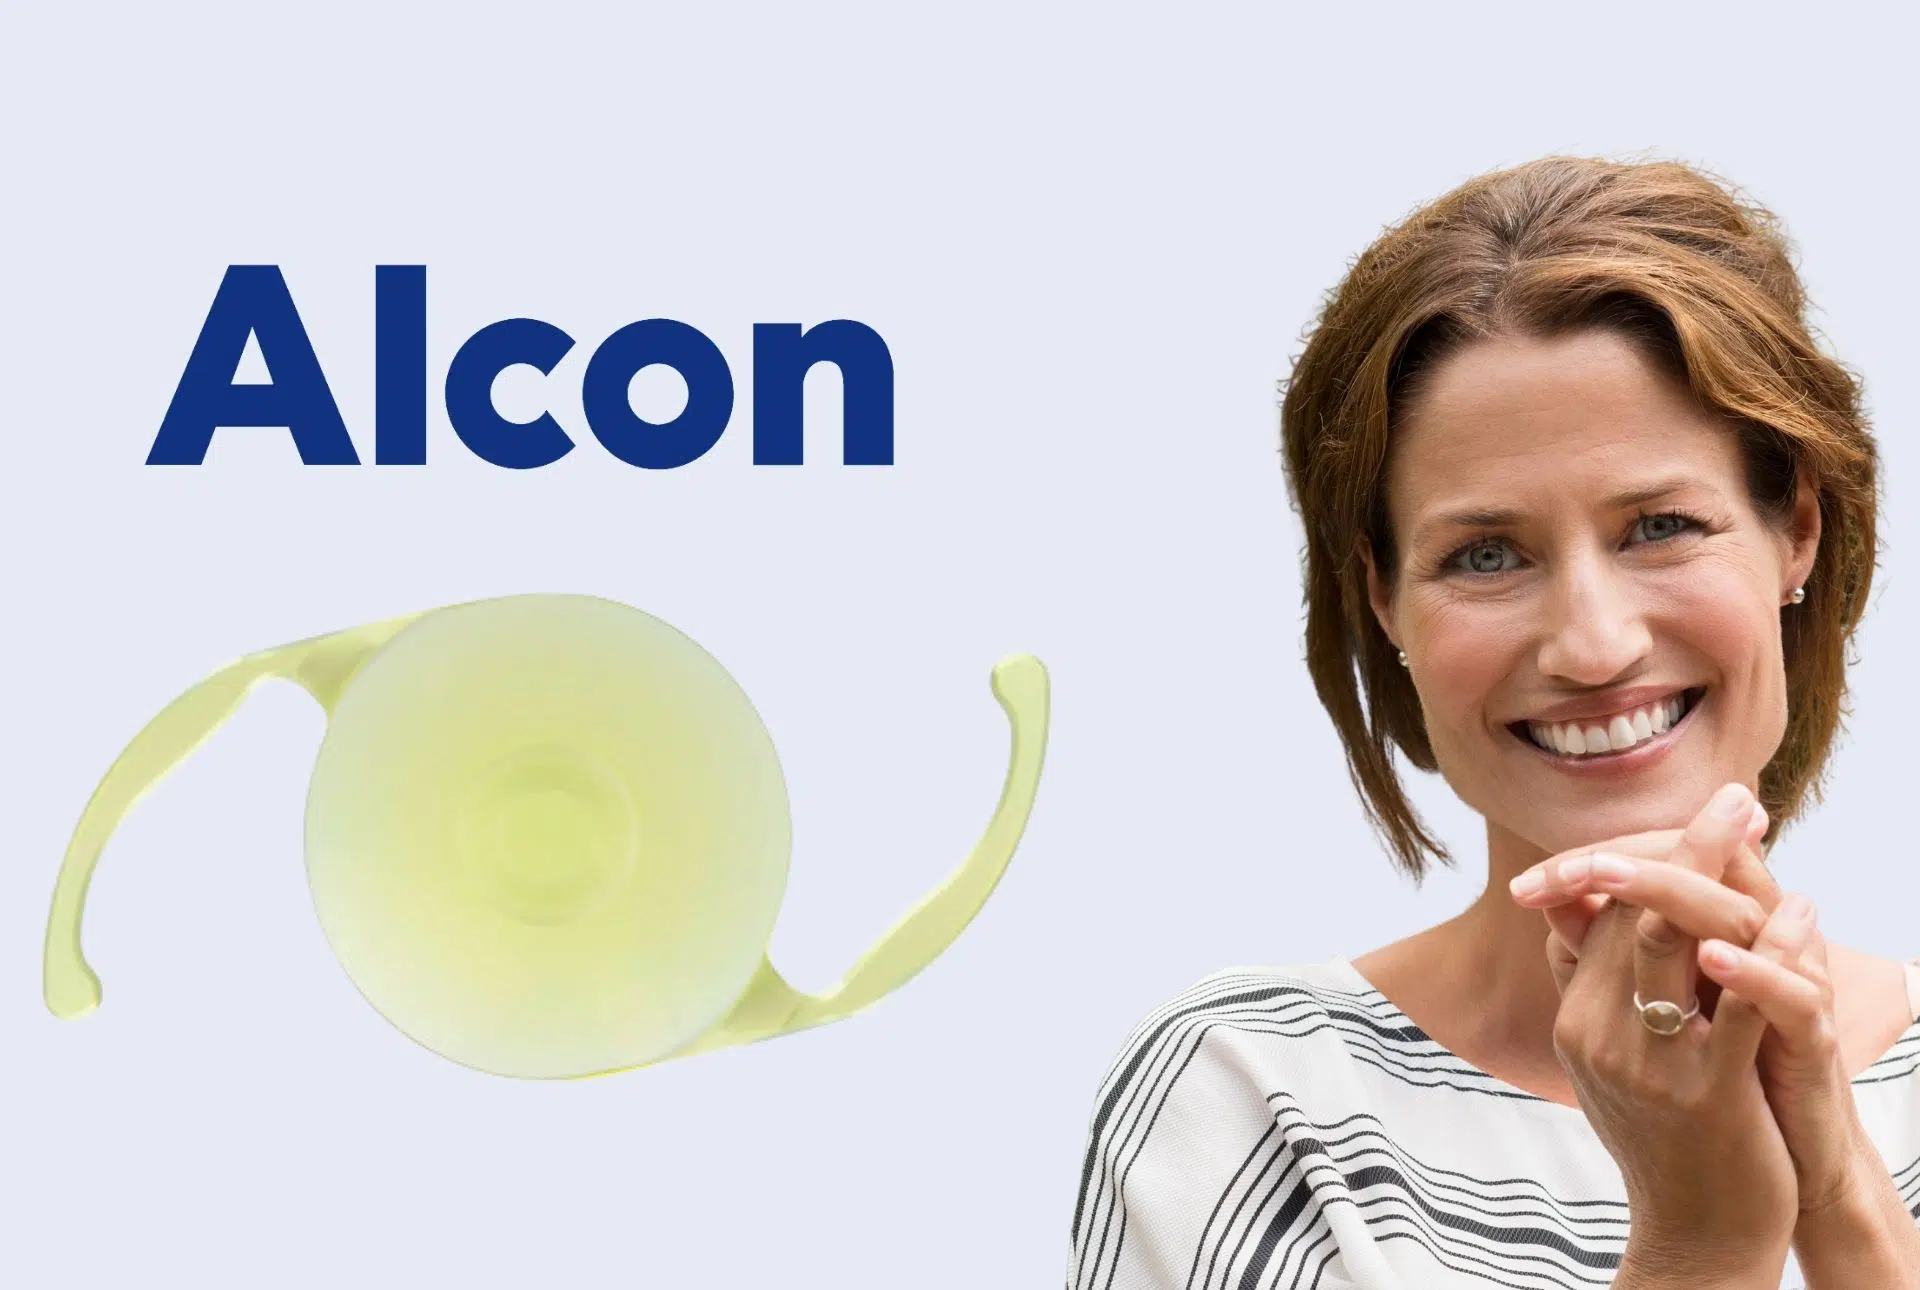 Alcon helps see people brilliantly